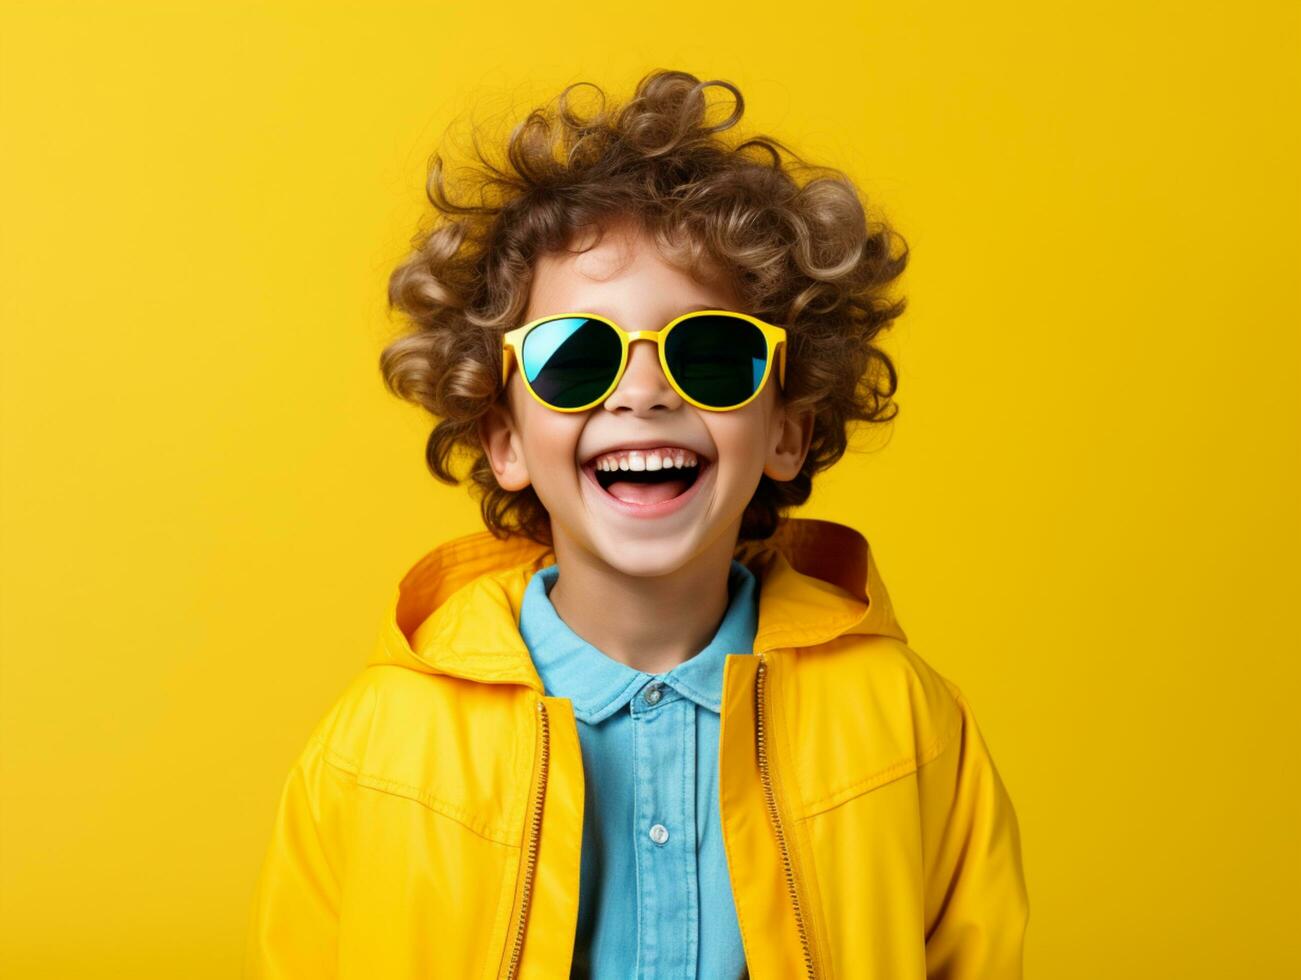 A joyful child, full of happiness, with a bright yellow smile. photo